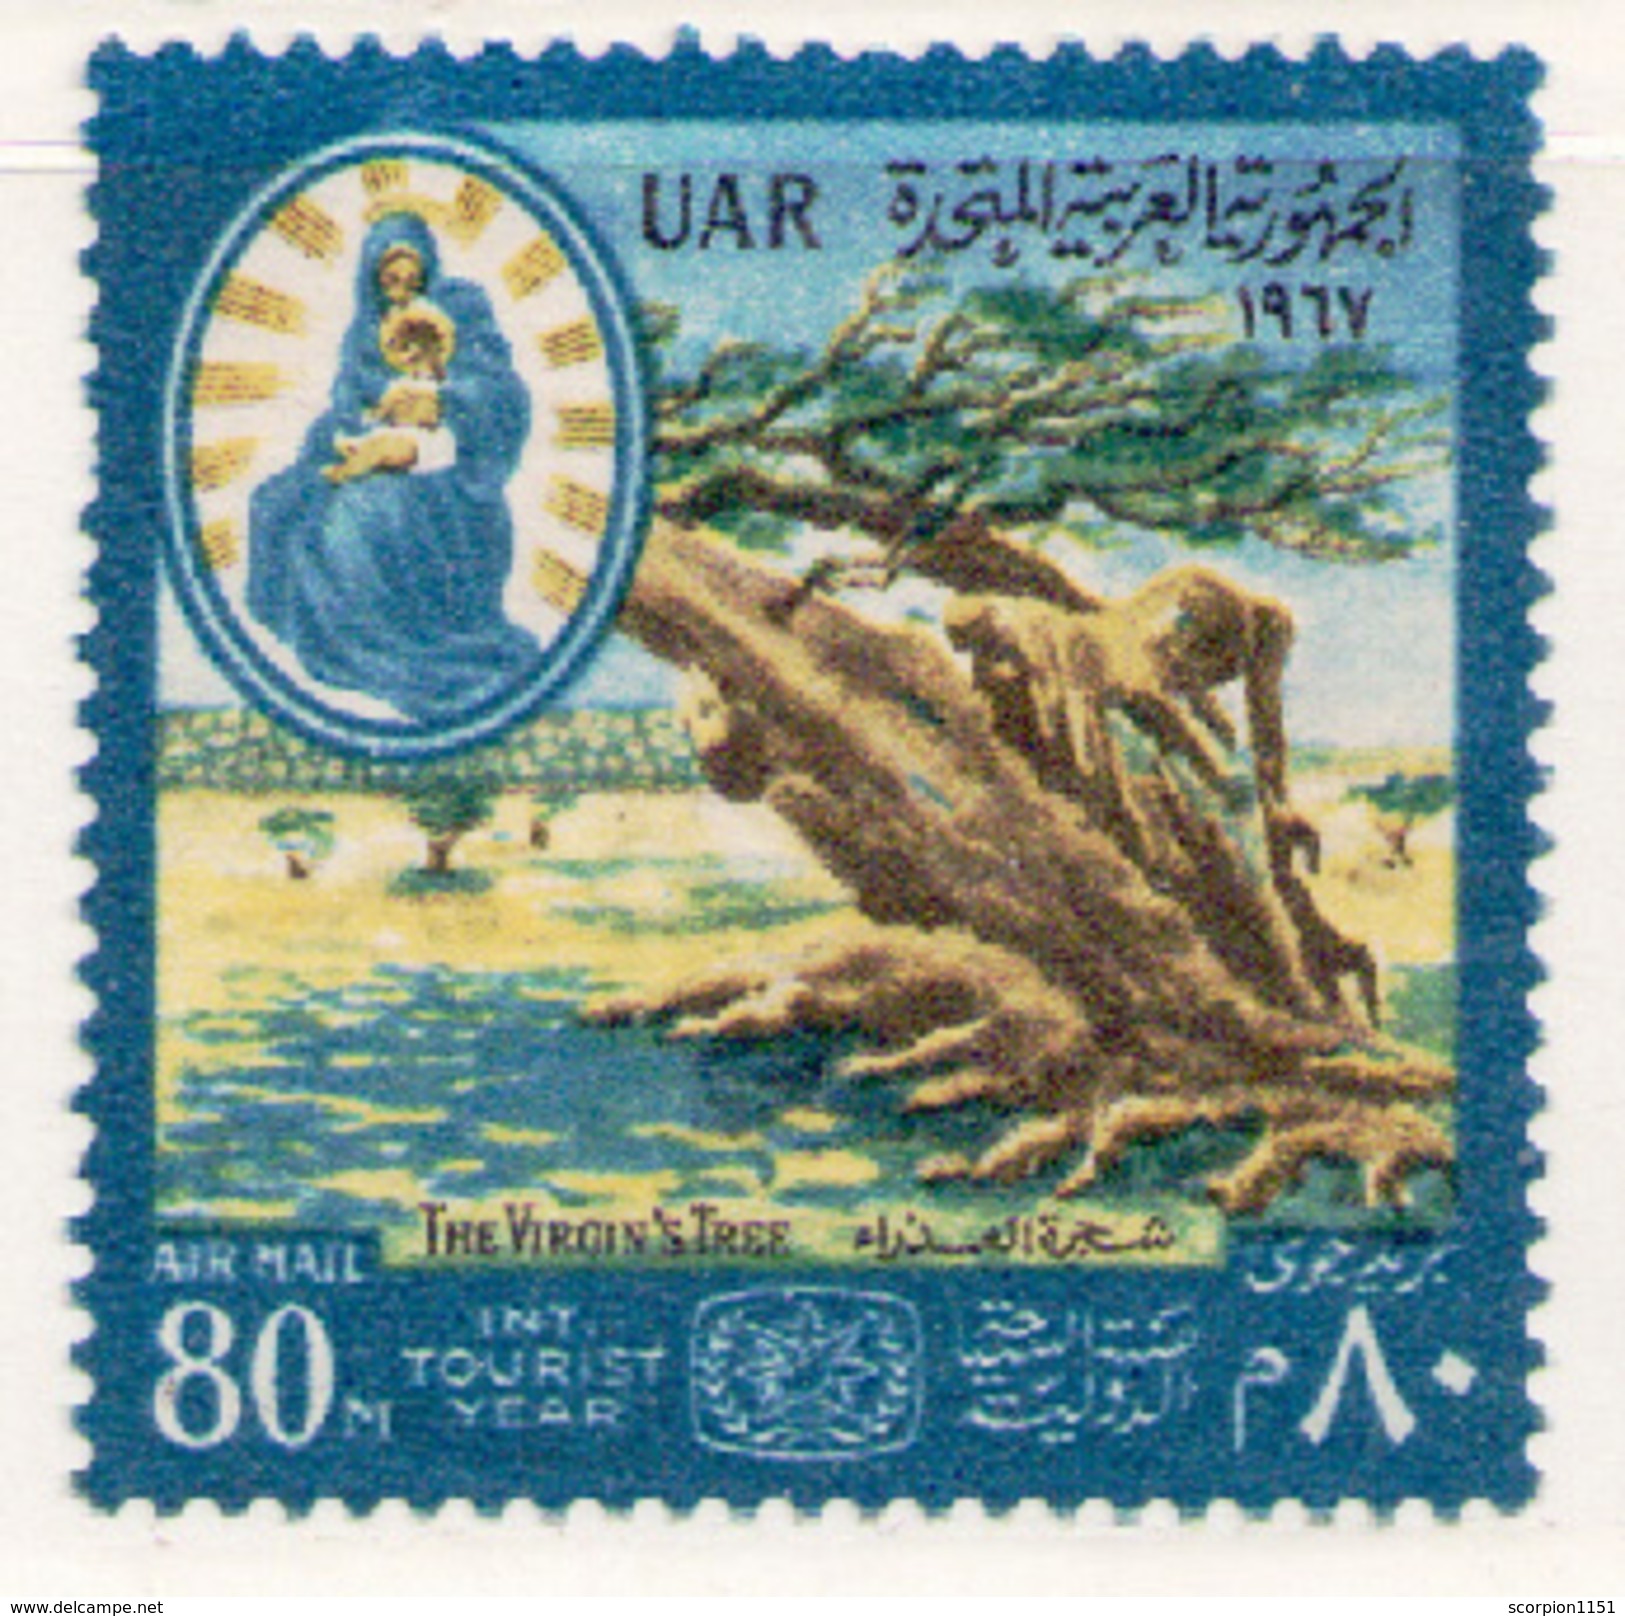 EGYPT 1967 - From Set Used - Used Stamps